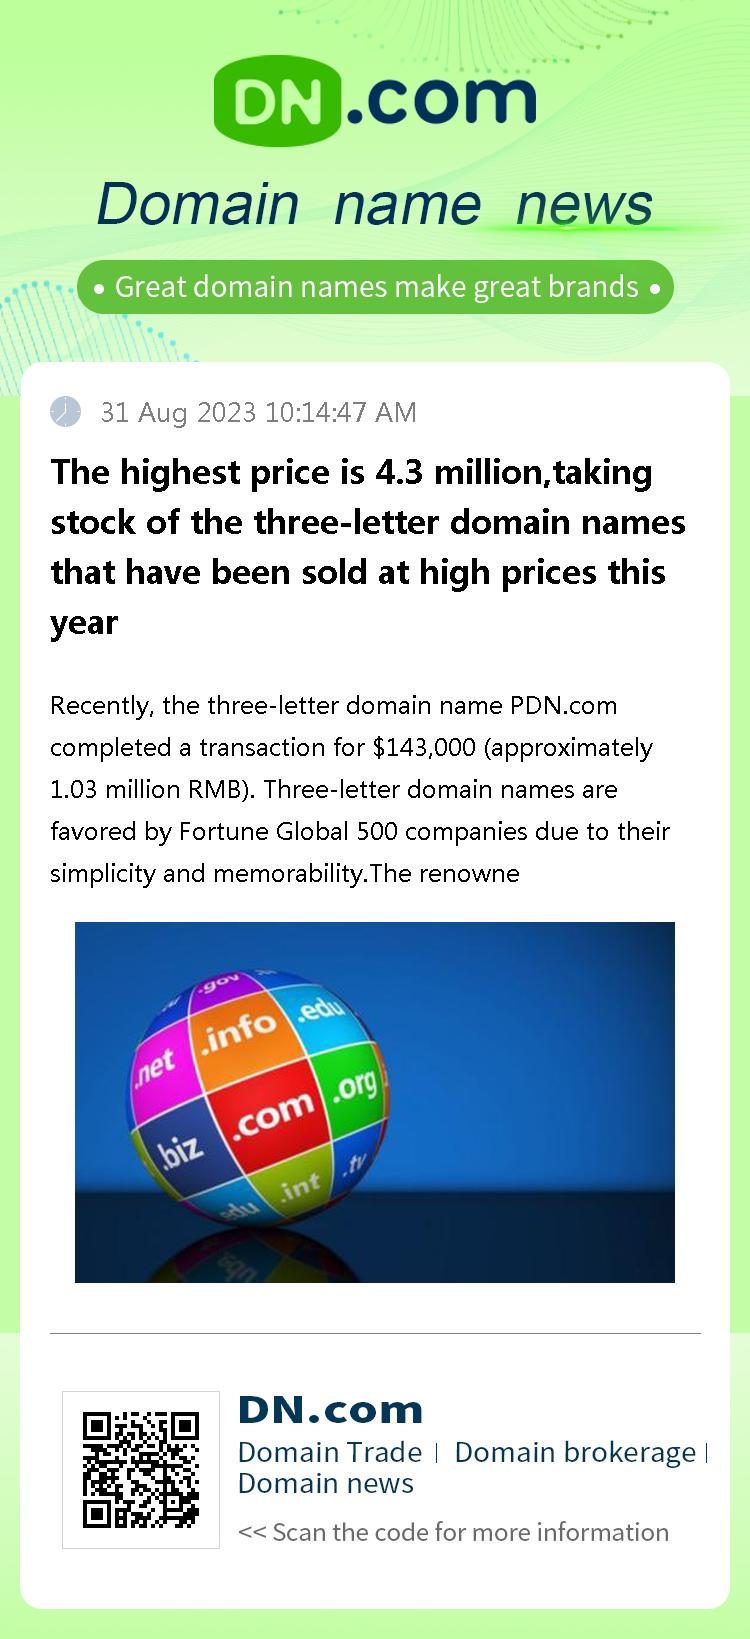 The highest price is 4.3 million,taking stock of the three-letter domain names that have been sold at high prices this year